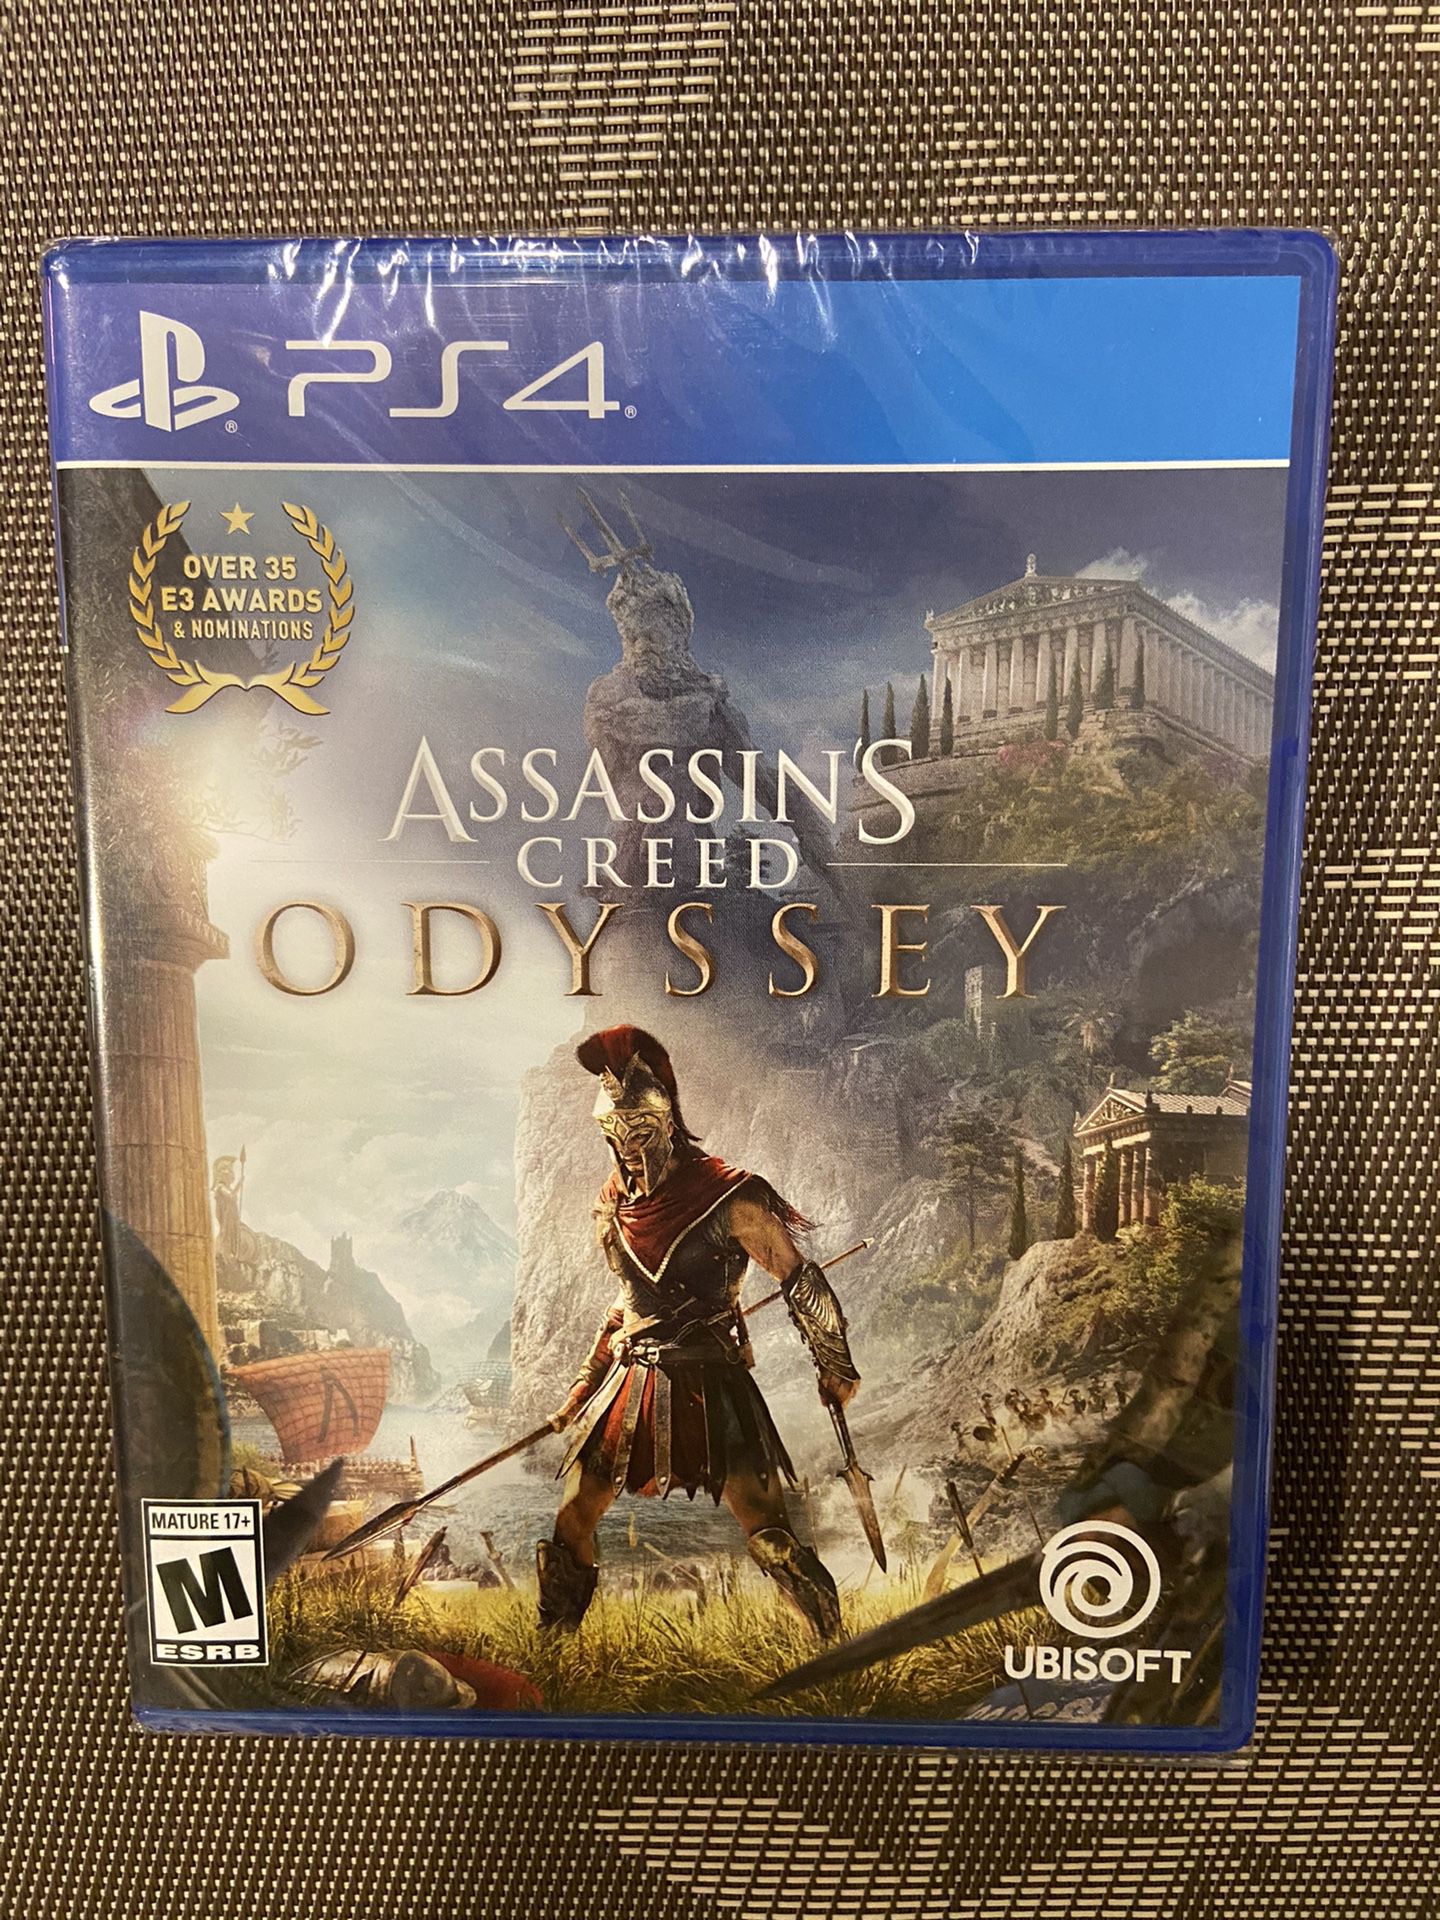 Assassin’s creed odyssey playstation 4 ps4 brand new